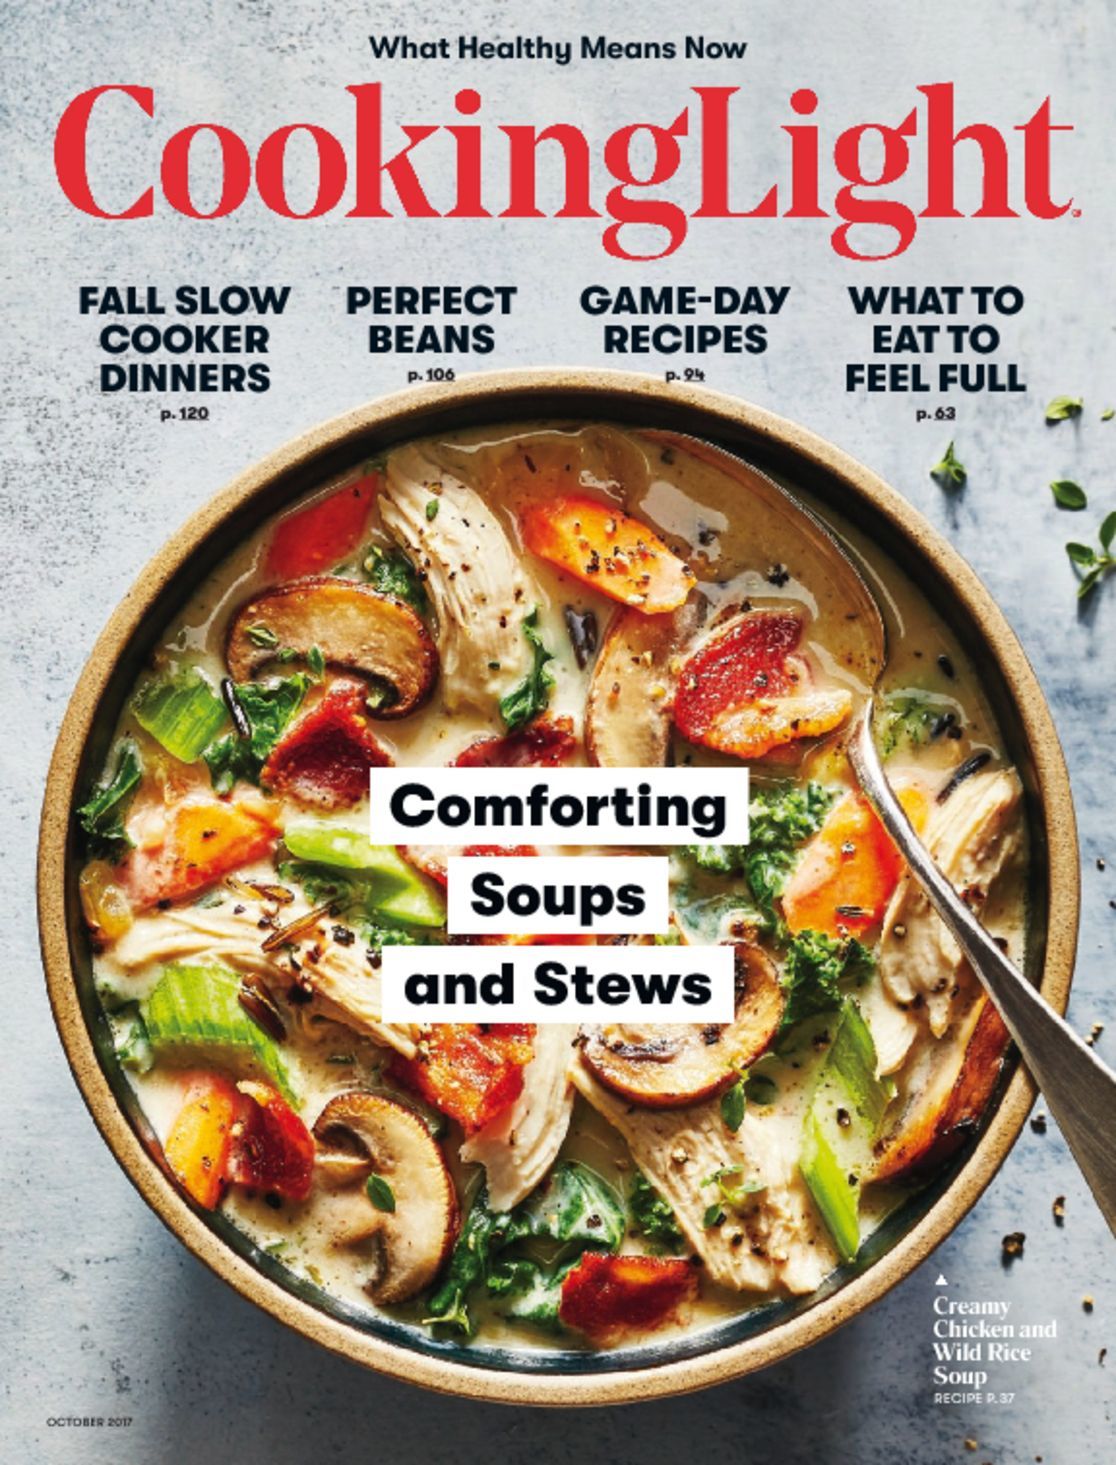 Cooking Light Magazine. Cook pdf. Perfect Slow.